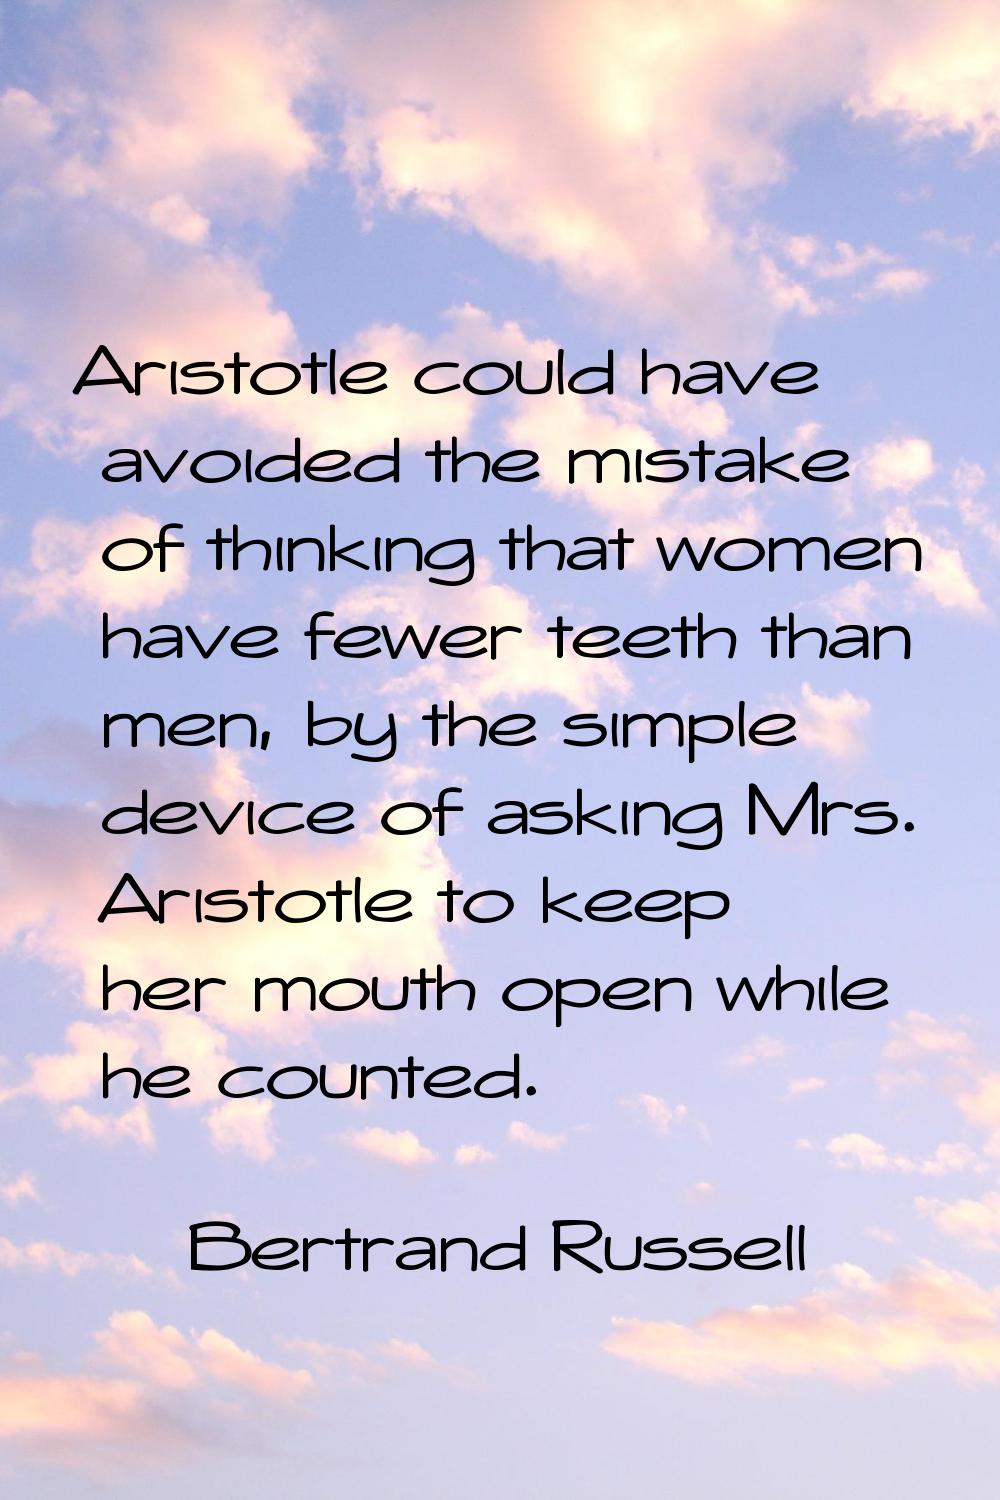 Aristotle could have avoided the mistake of thinking that women have fewer teeth than men, by the s